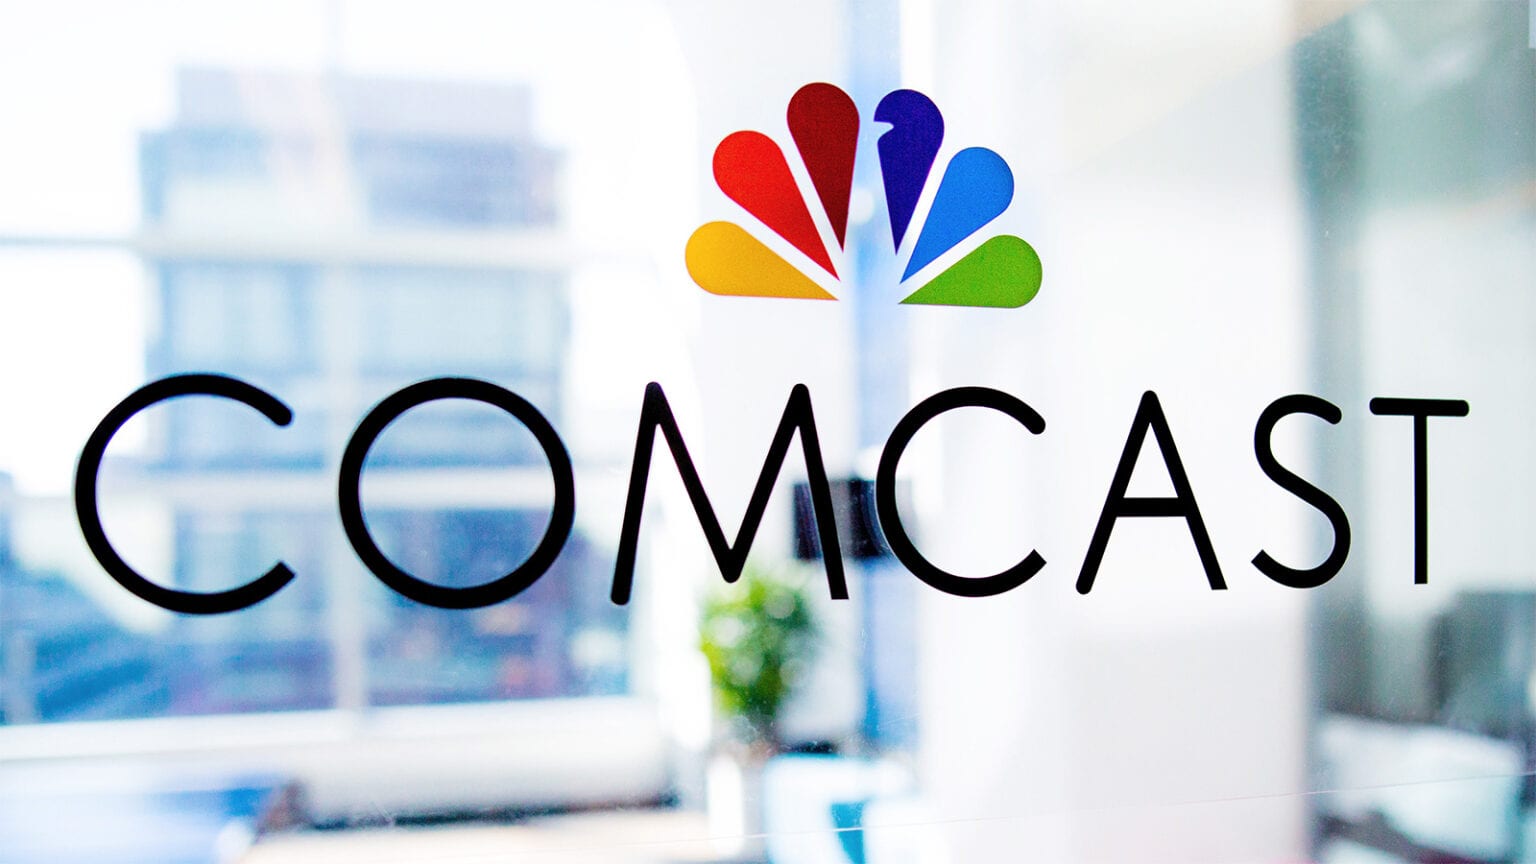 Comcast Contracts with Power to Supply Operations with